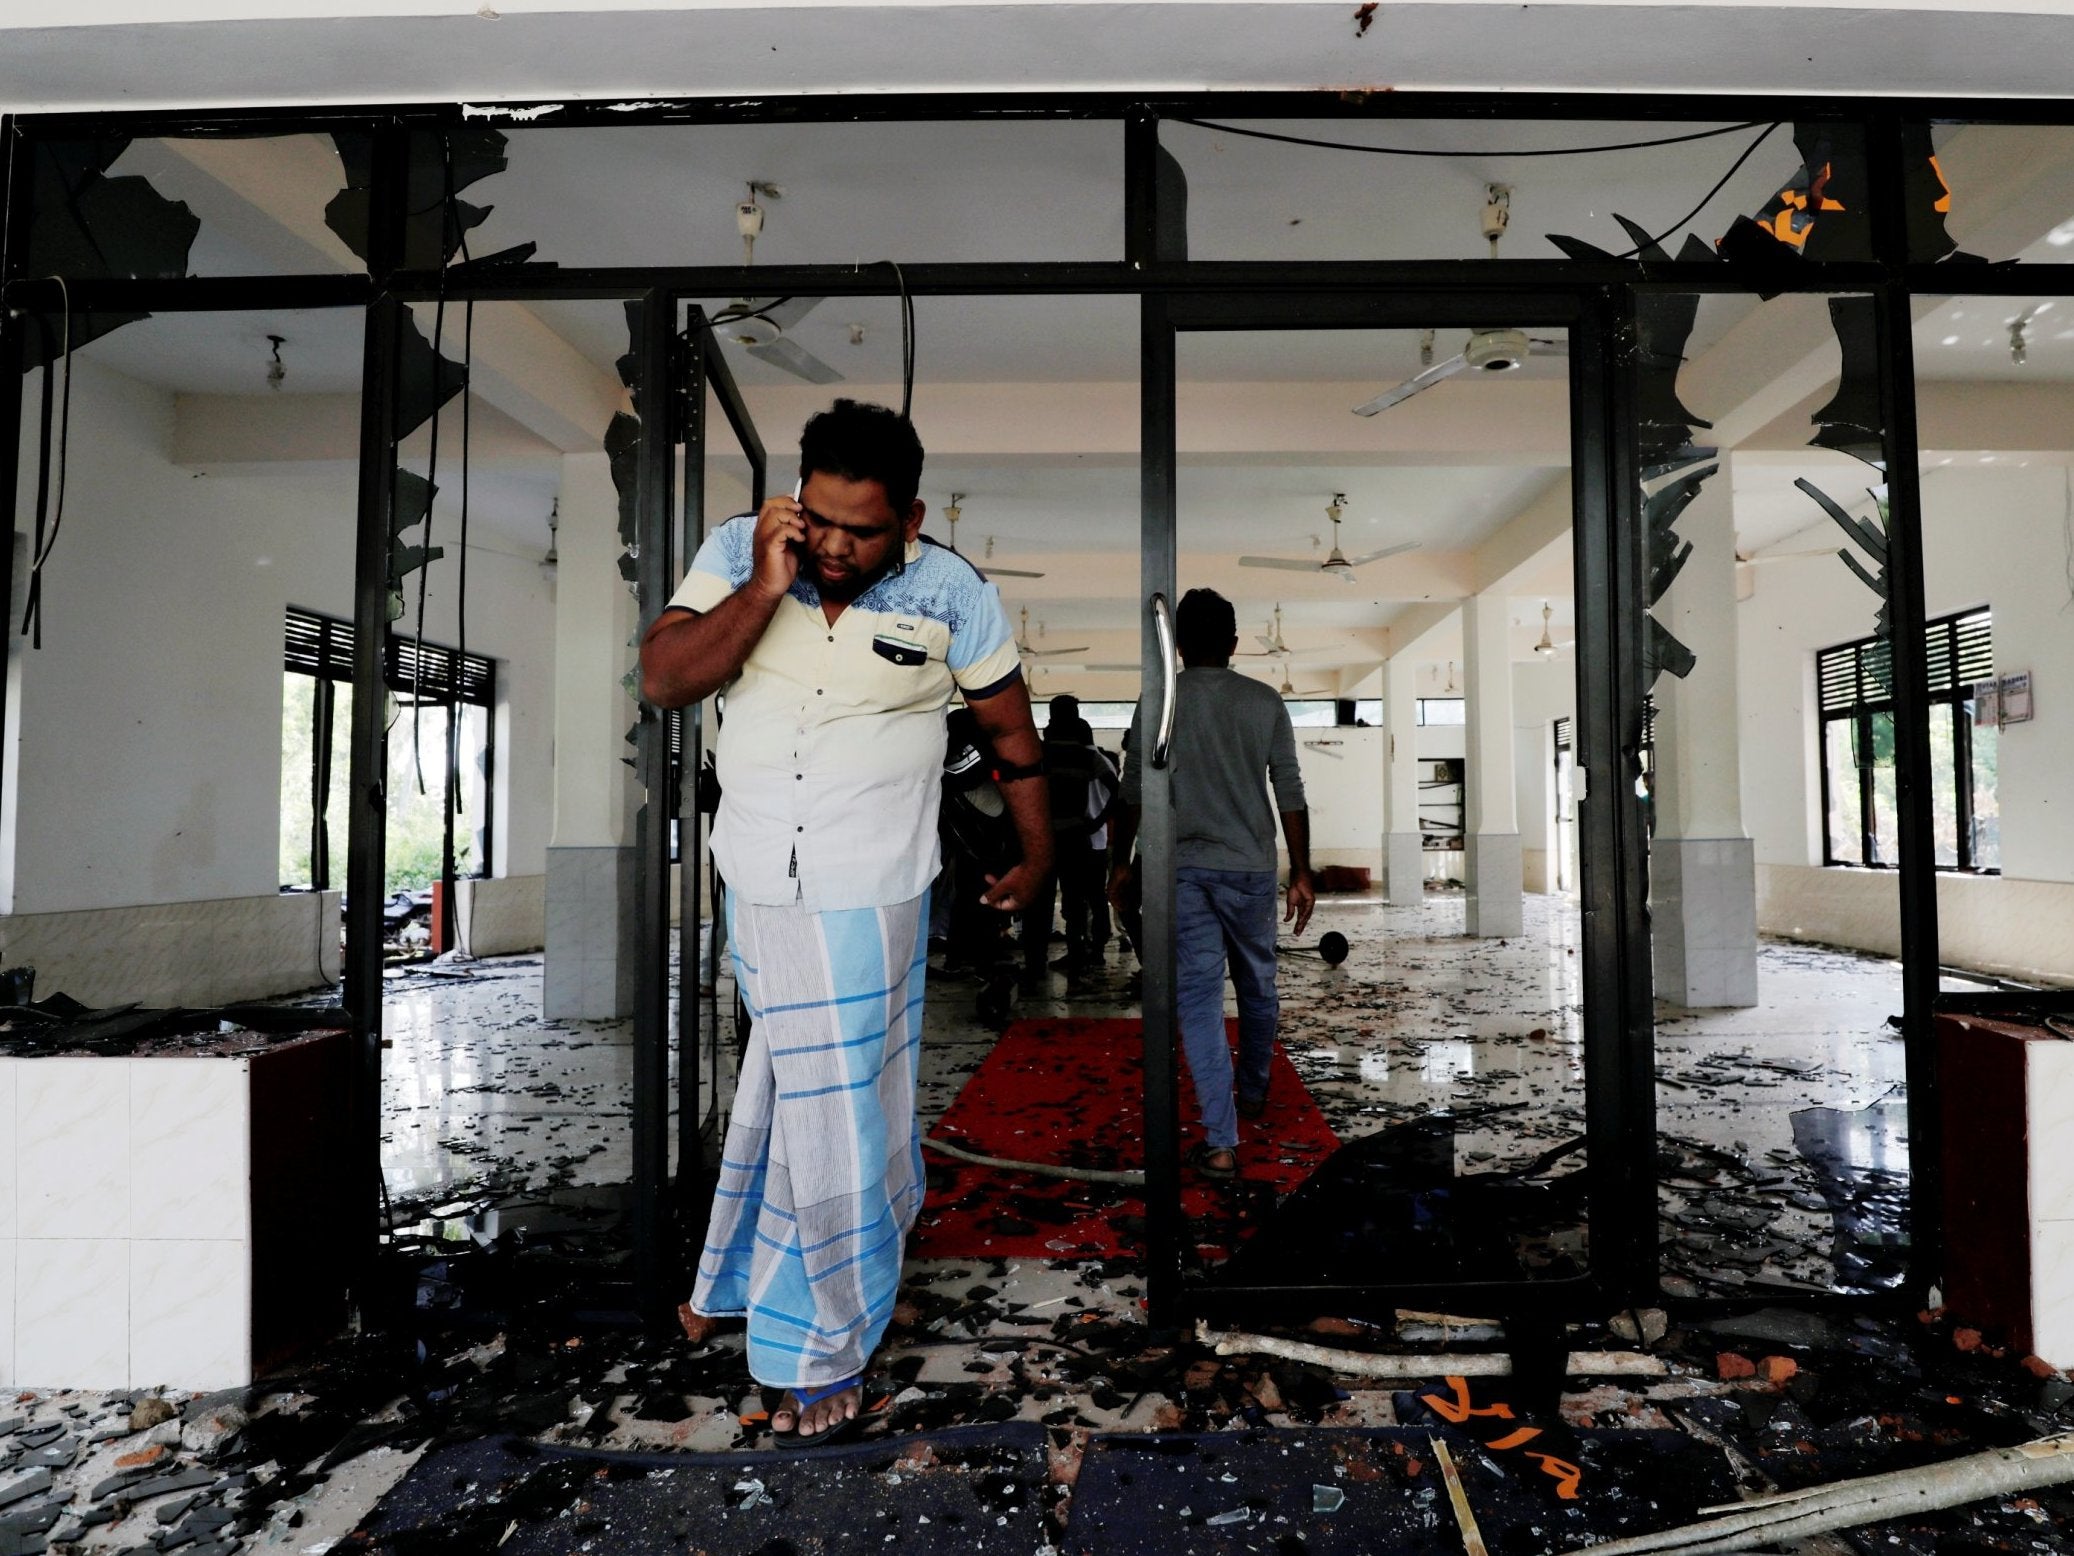 A Muslim man stands inside a mosque after a mob attack in Sri Lanka